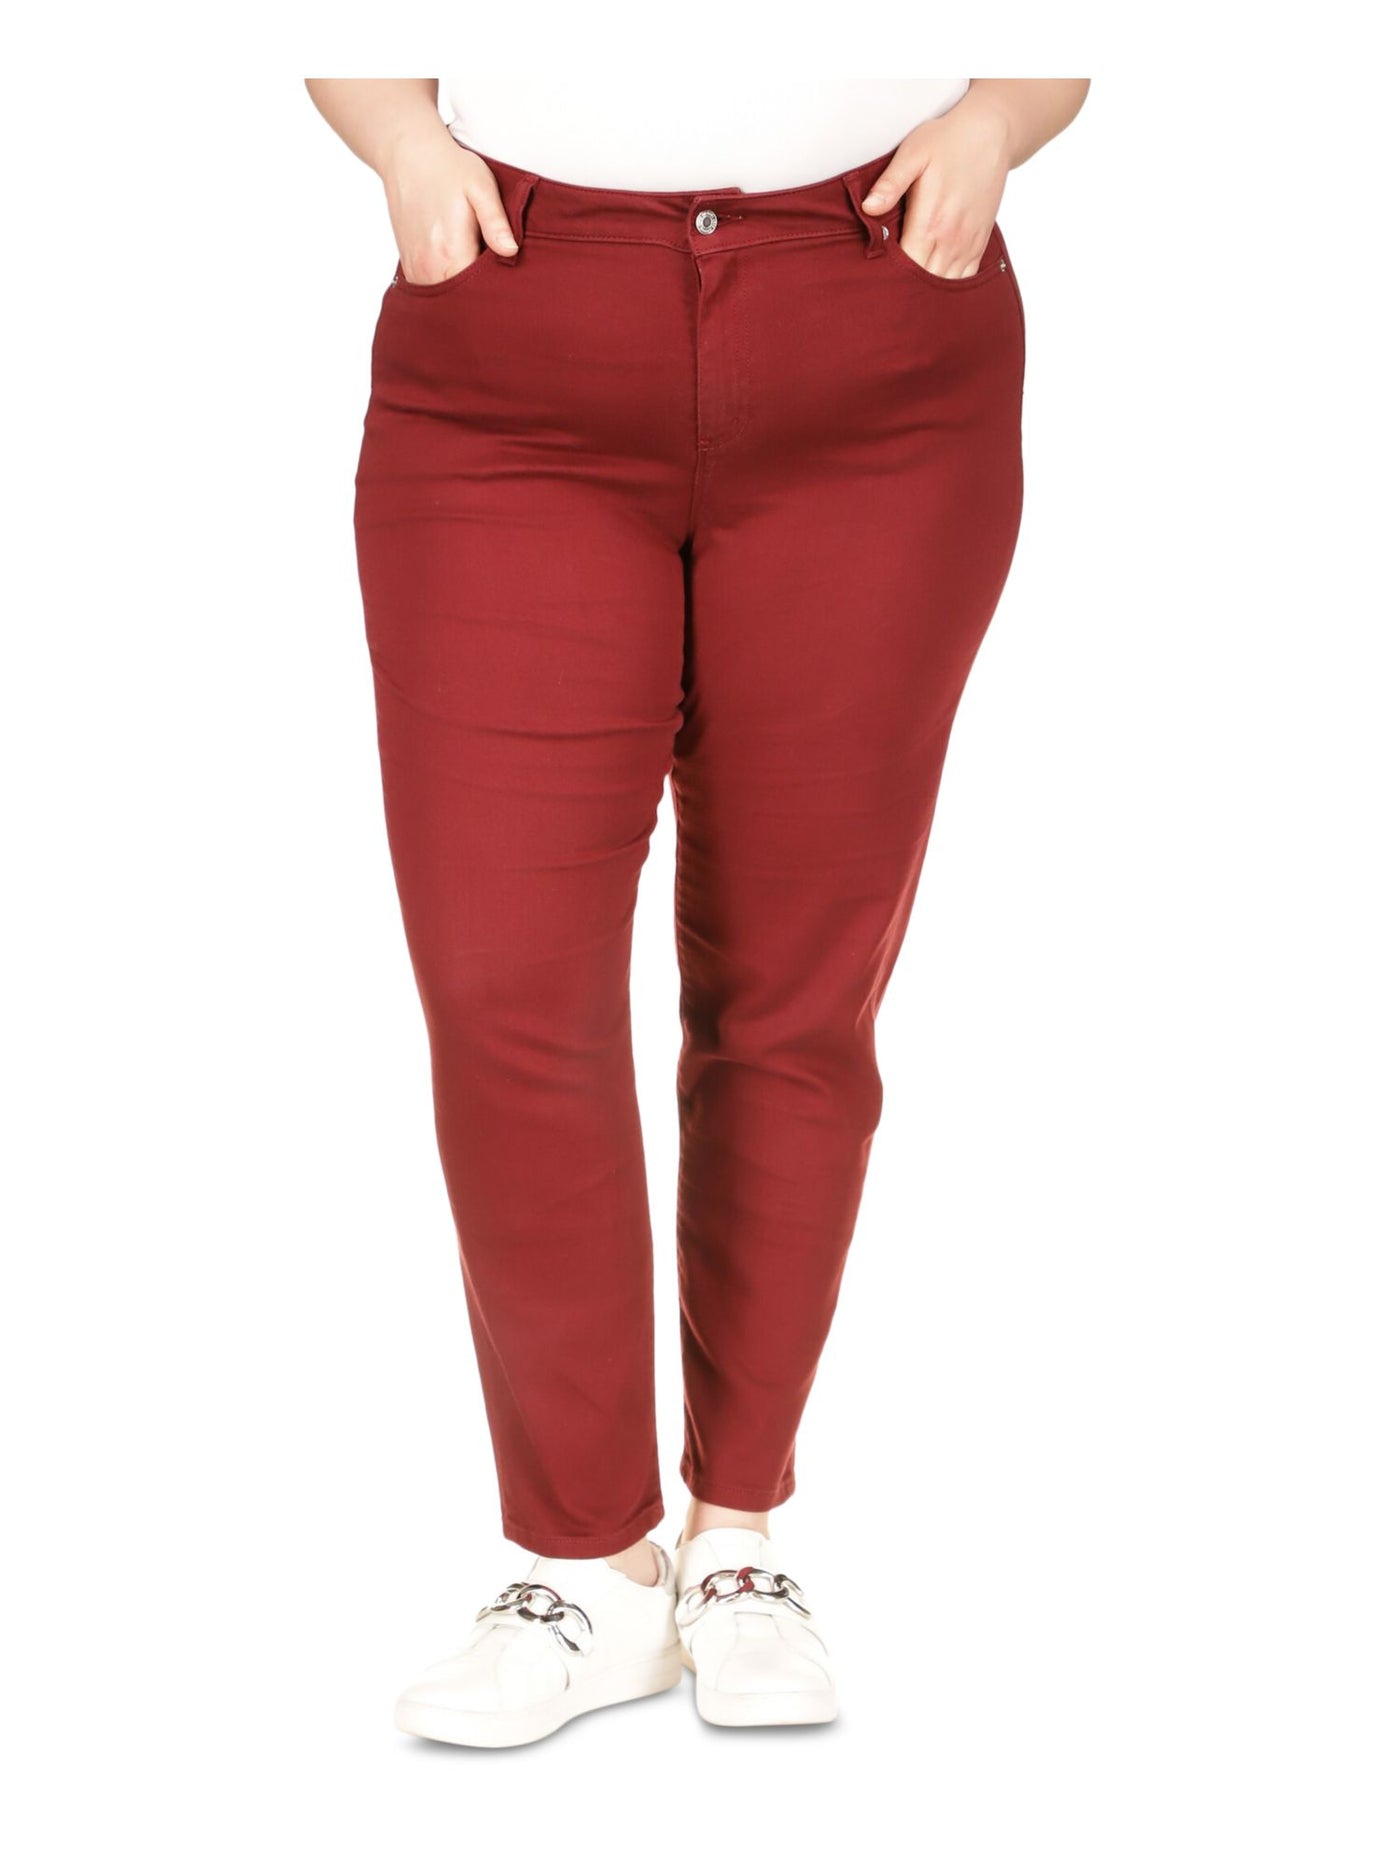 MICHAEL MICHAEL KORS Womens Red Stretch Pocketed Zippered Button Front High Waisted Skinny Jeans Plus 18W